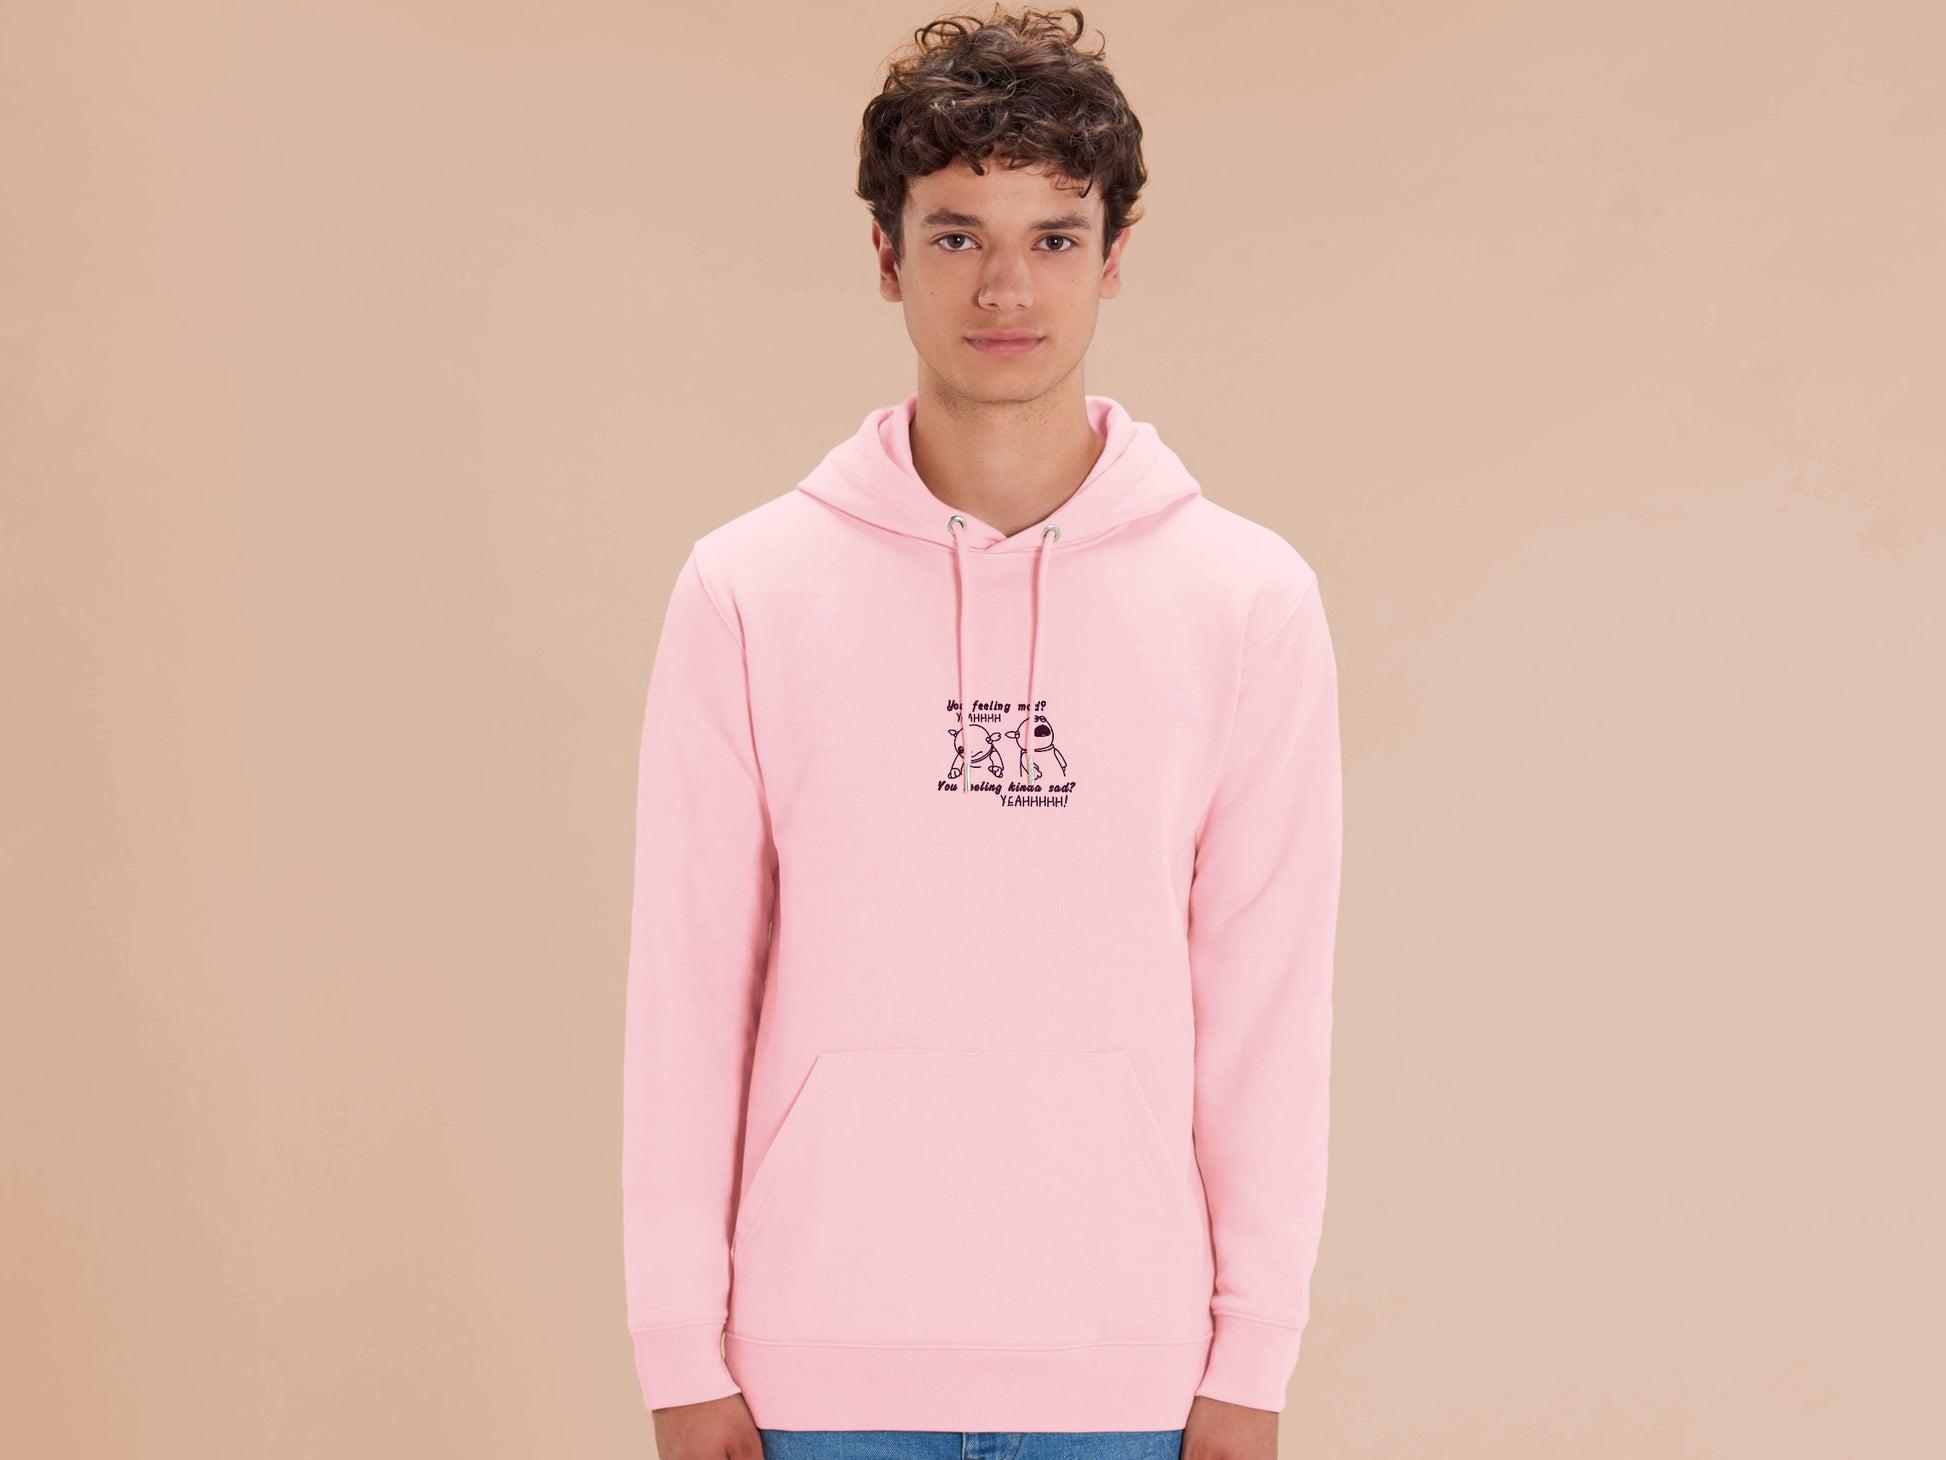 Man wearing an embroidered pink fleece hoodie  design of the character Mona from the puppet show Nanalan in two angry poses from the viral tiktok meme with the text You feeling mad? Yeah. You Feeling Kinda Sad? YEAHHHH!